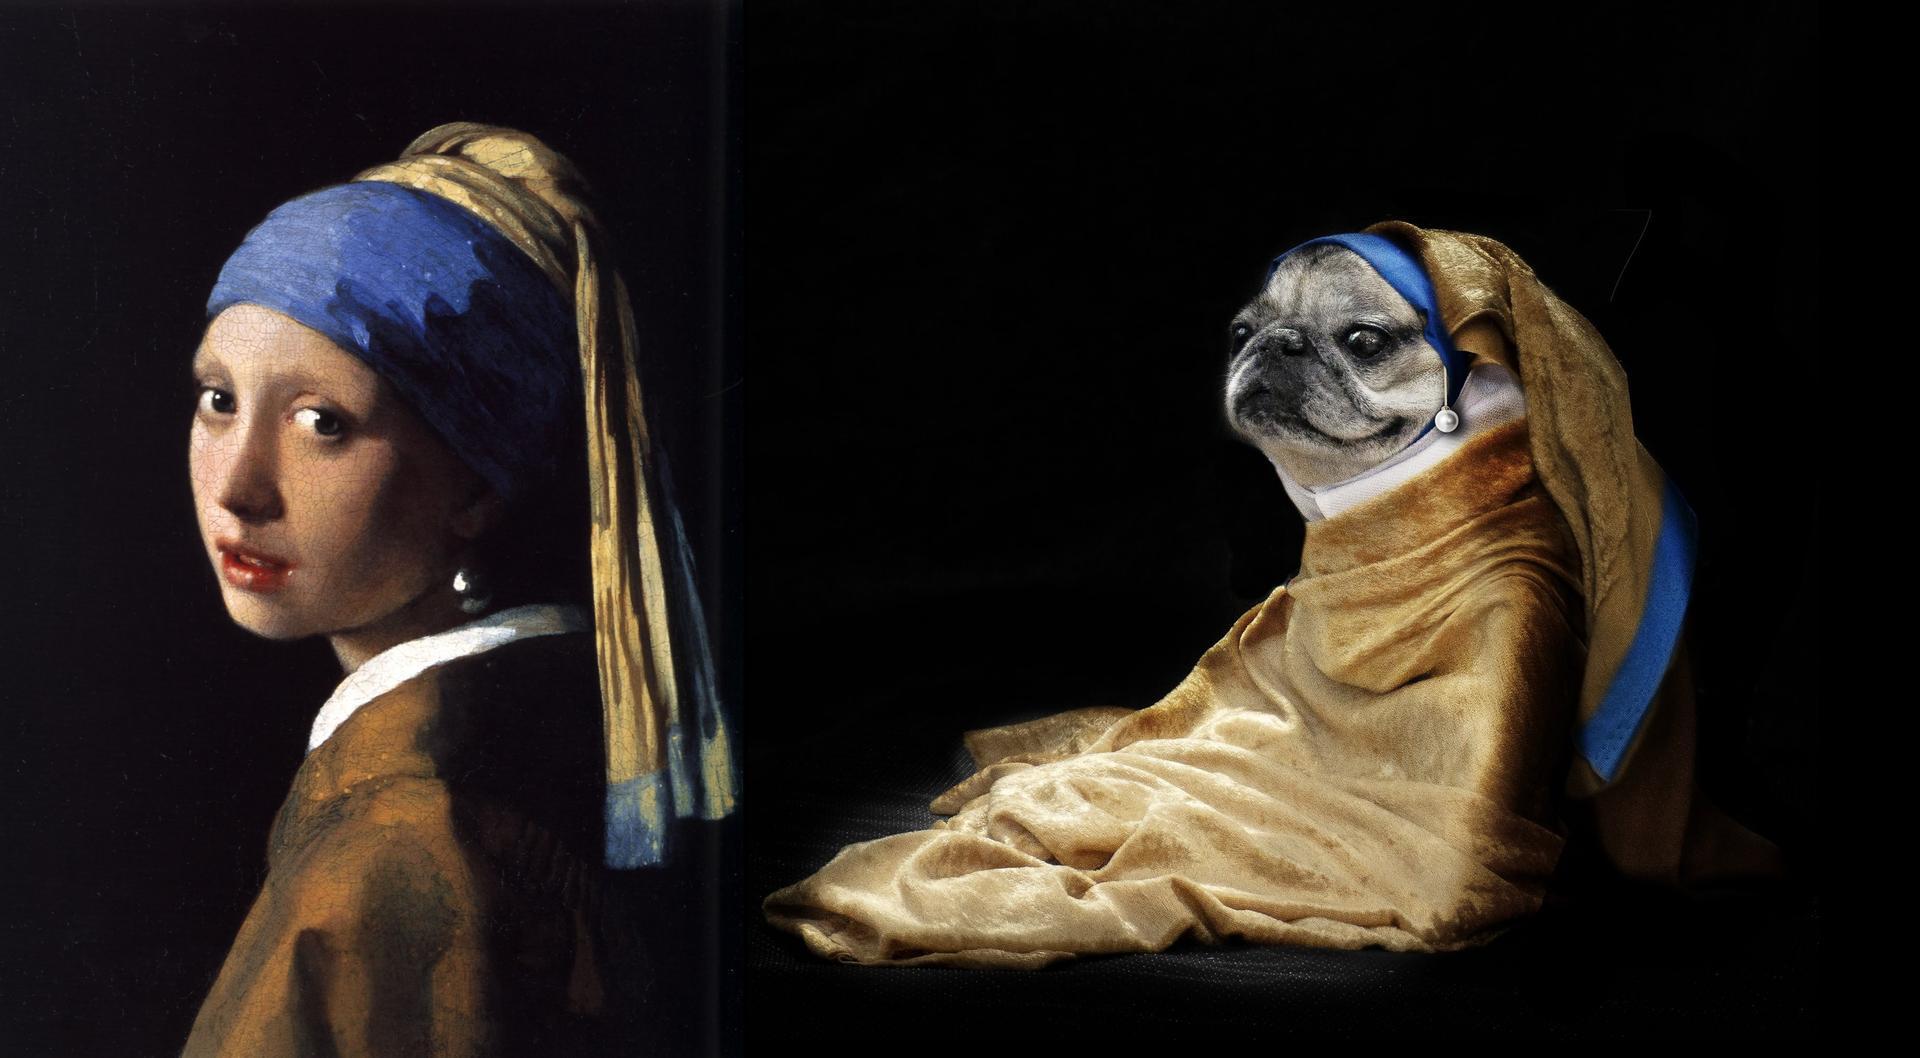 Getty museum challenge: recreate Vermeer the girl with a pearl earring